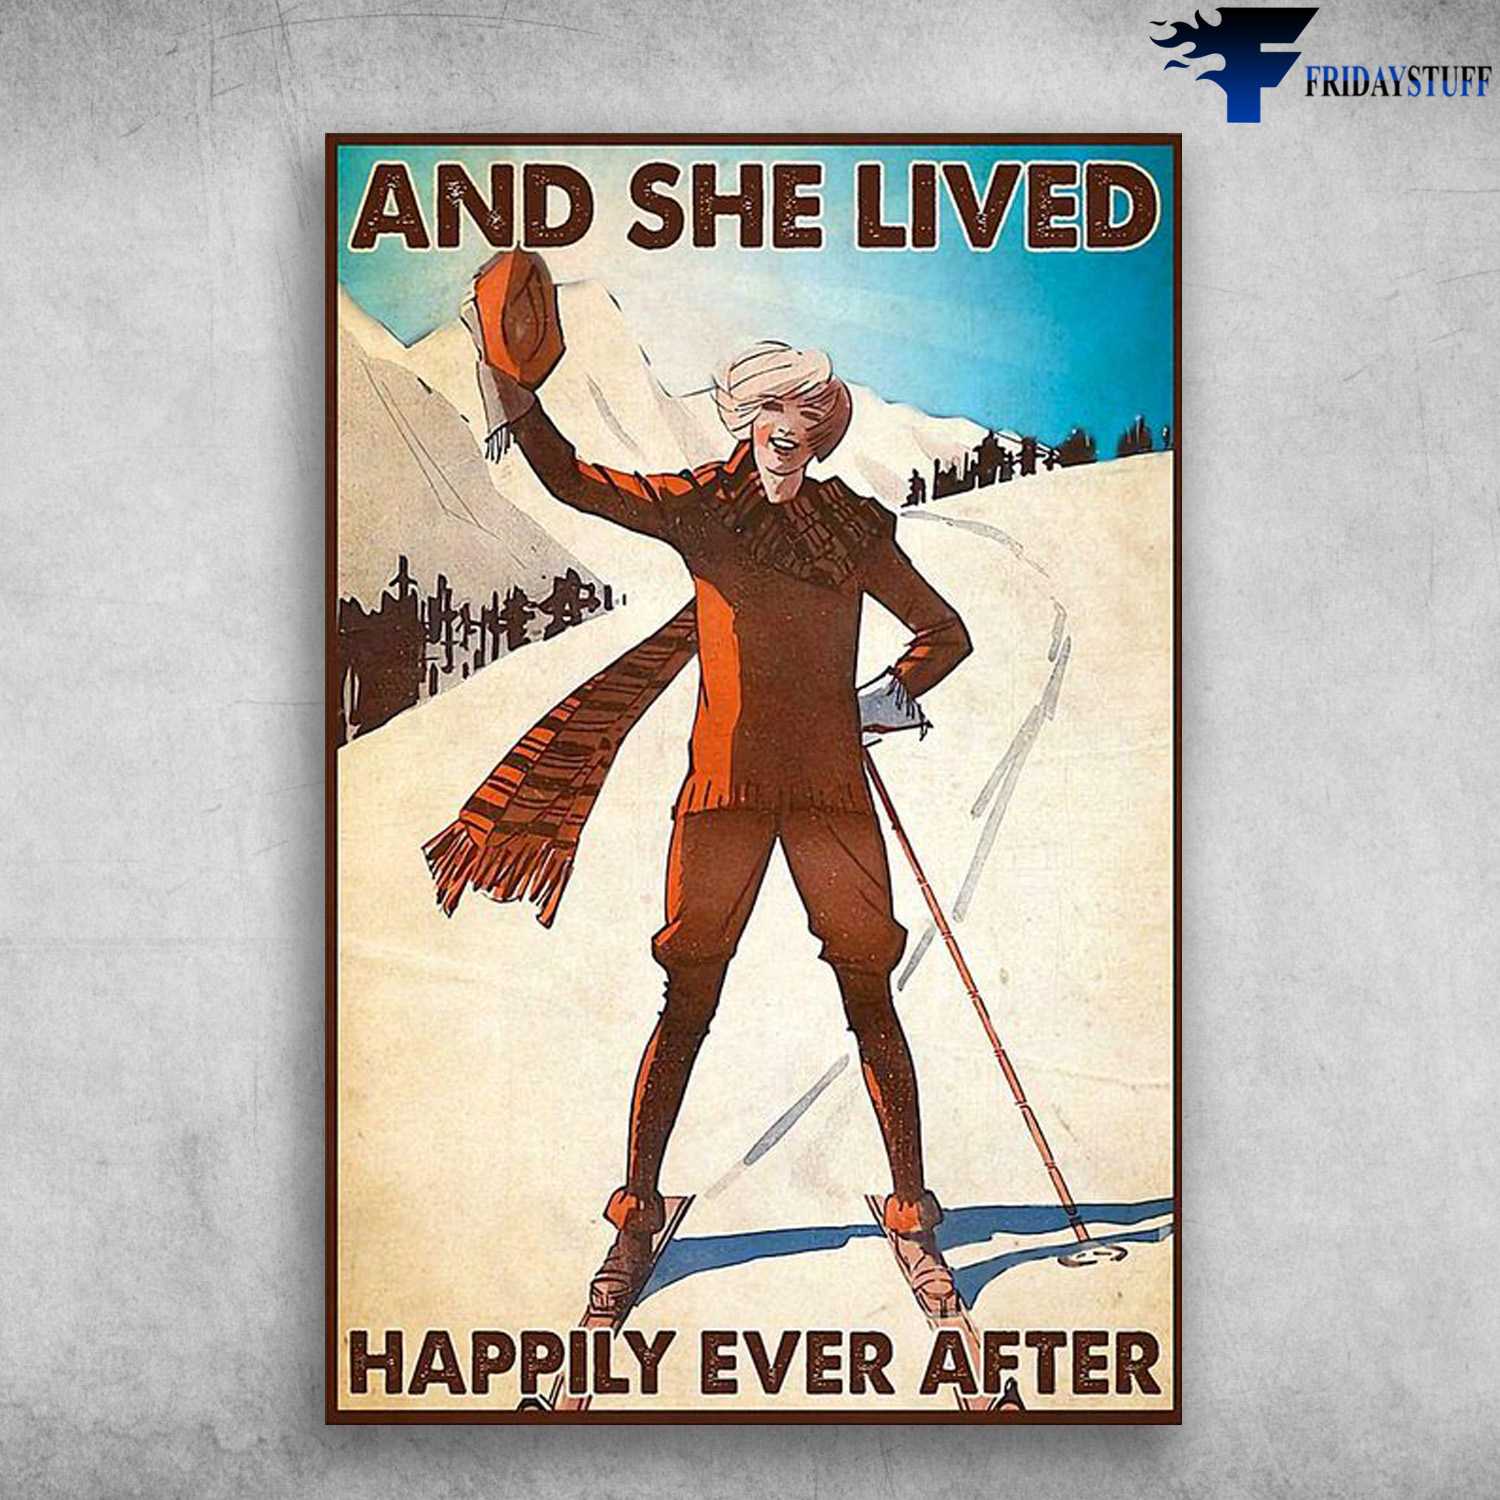 Skiing Lover, Skiing Poster, And She Lived, Happily Ever After